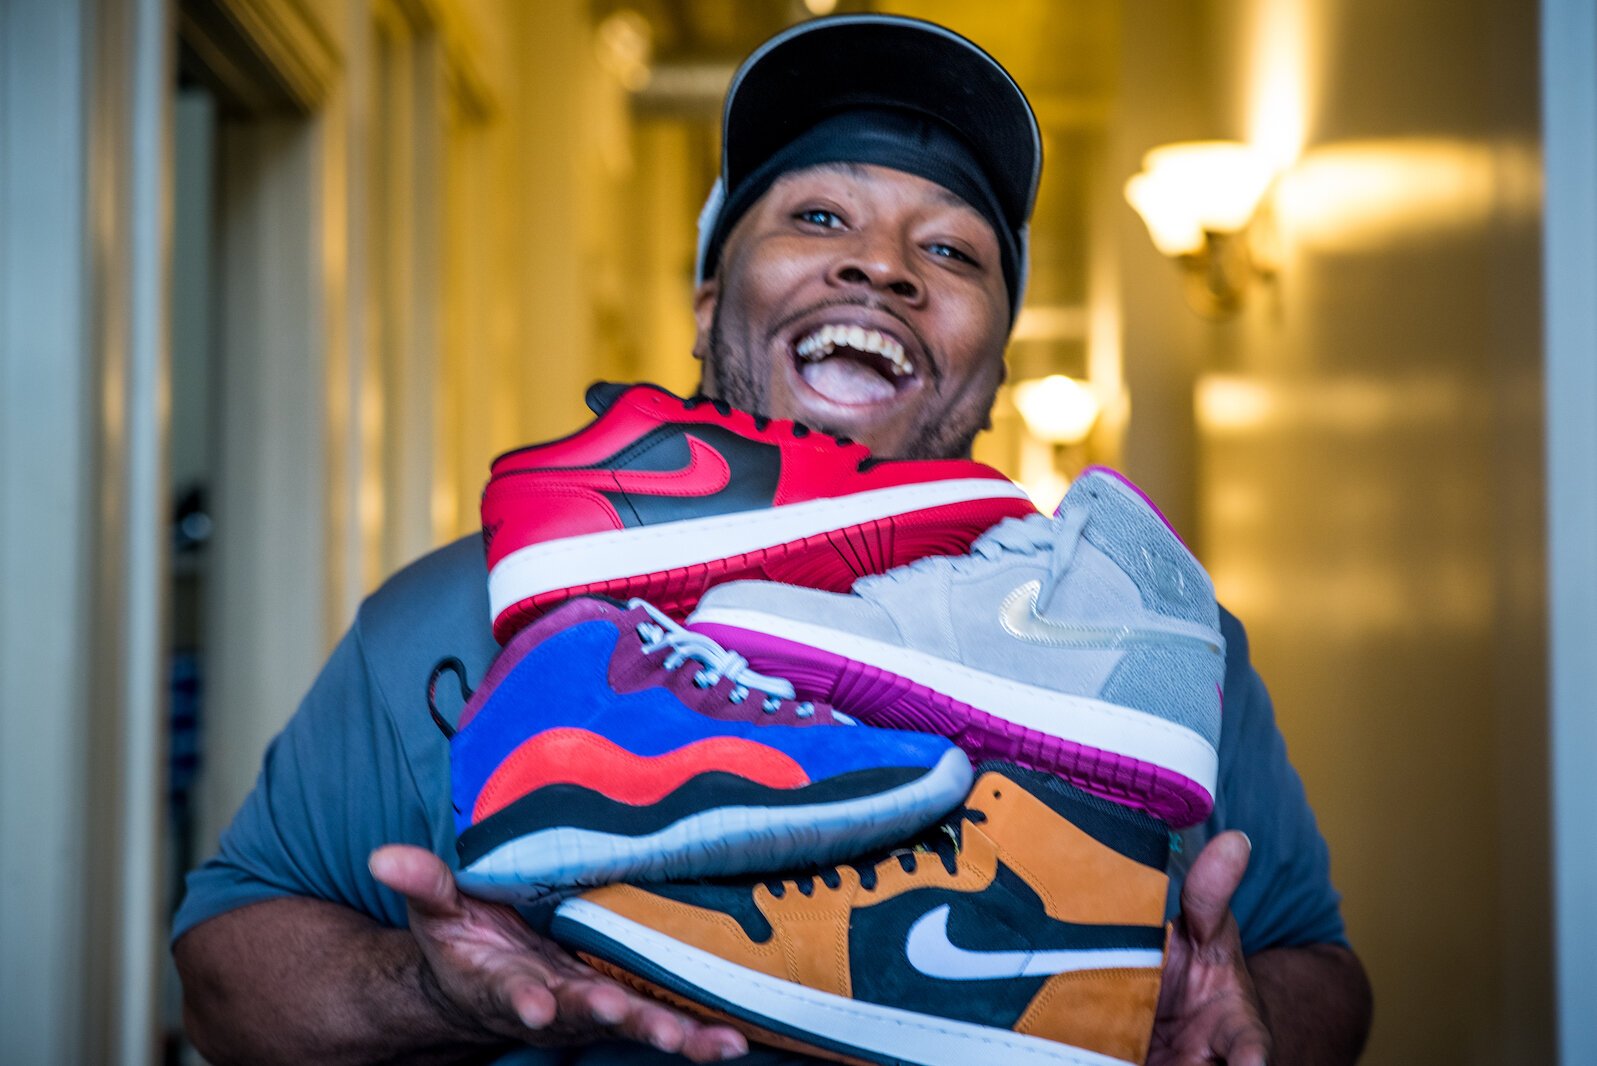 Roosevelt Lee-Fleming of Kalamazoo holds some of the sneakers that have been the focus of his business, The Drip Sneakers LLC.